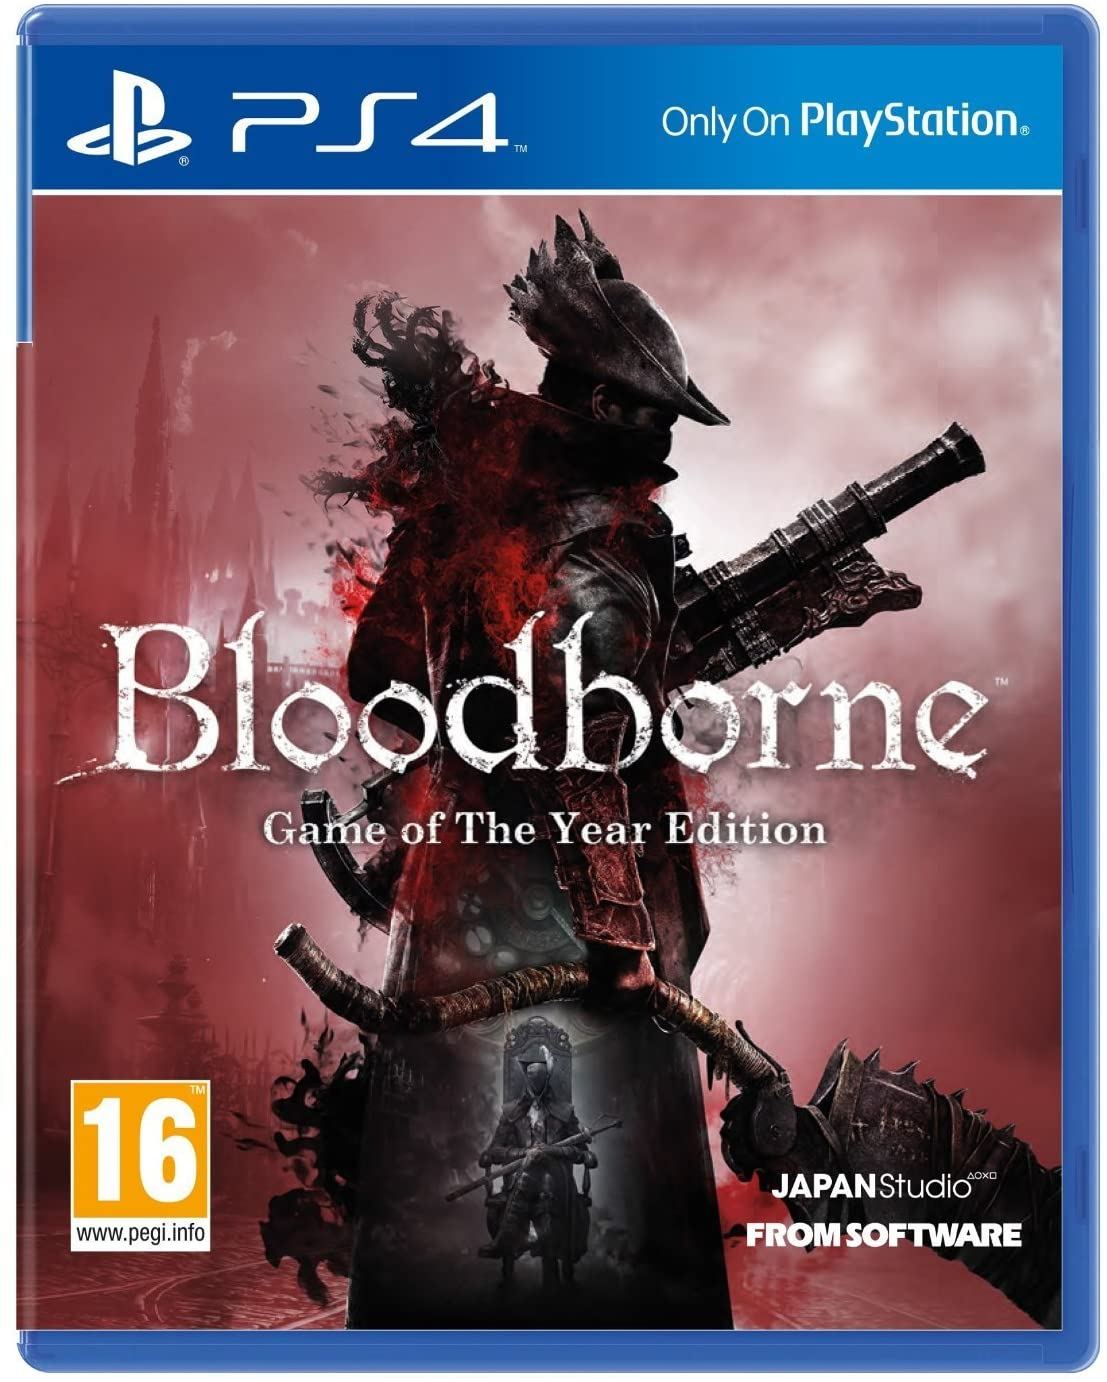 Bloodborne (Game of the Year Edition) PS4 CUSA-03173/RSC Russia